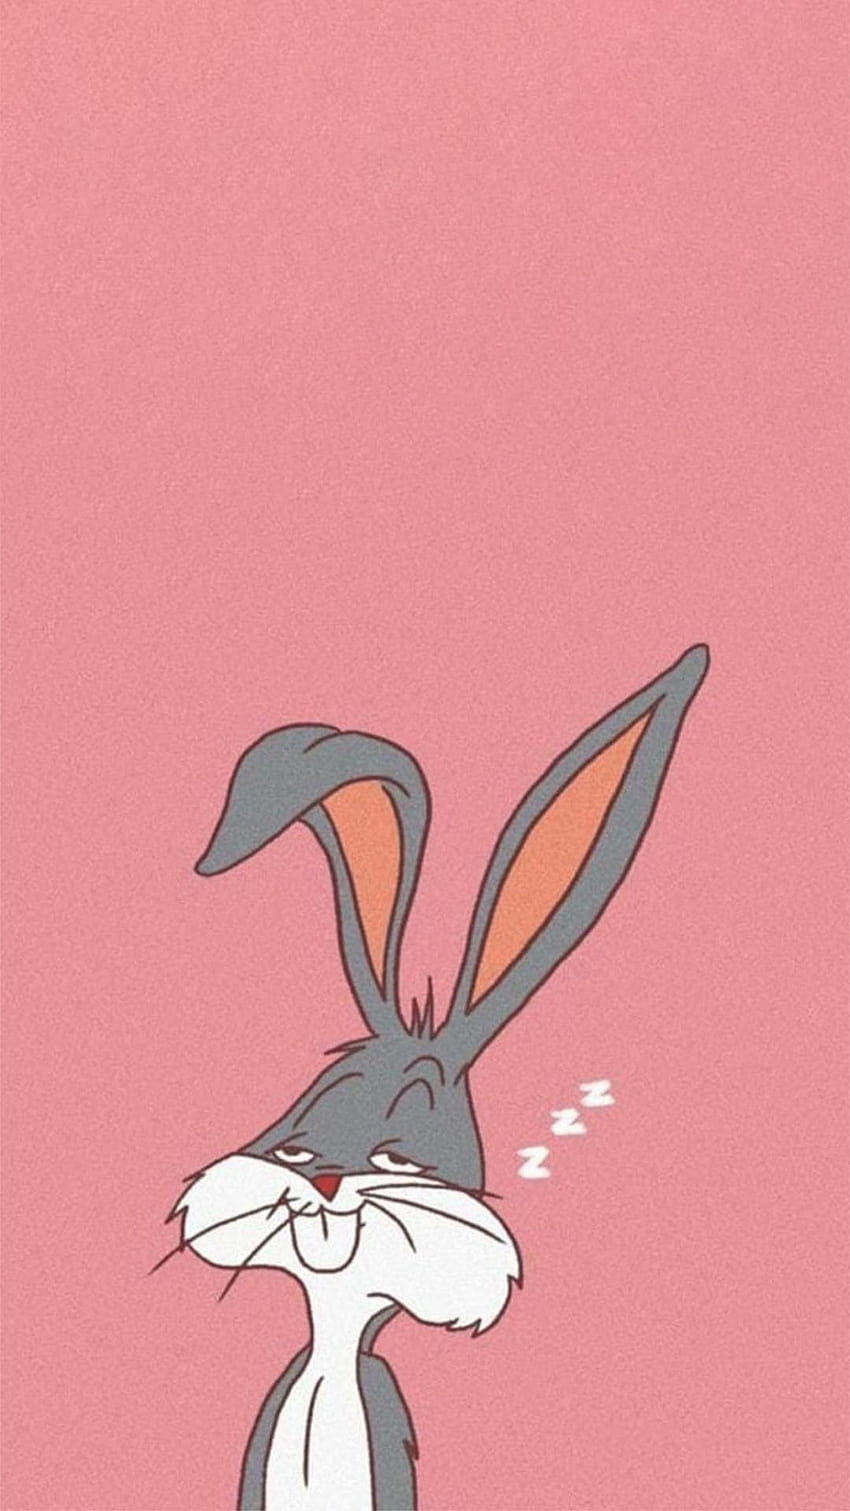 A cartoon rabbit with big ears and closed eyes - Bugs Bunny